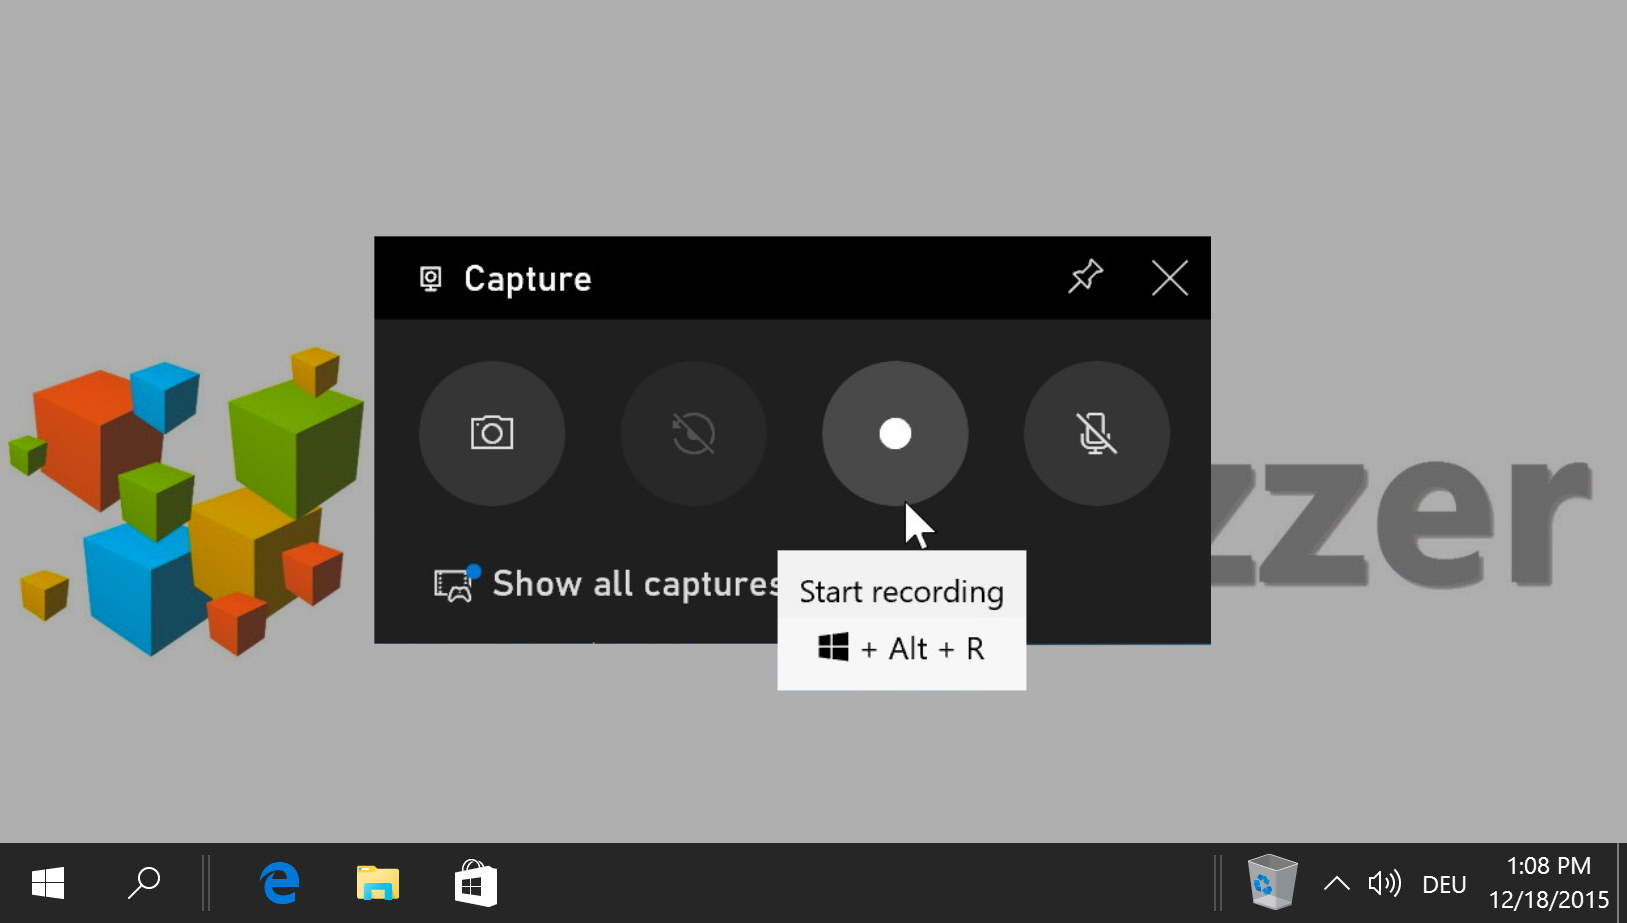 how to screen recorder windows 10